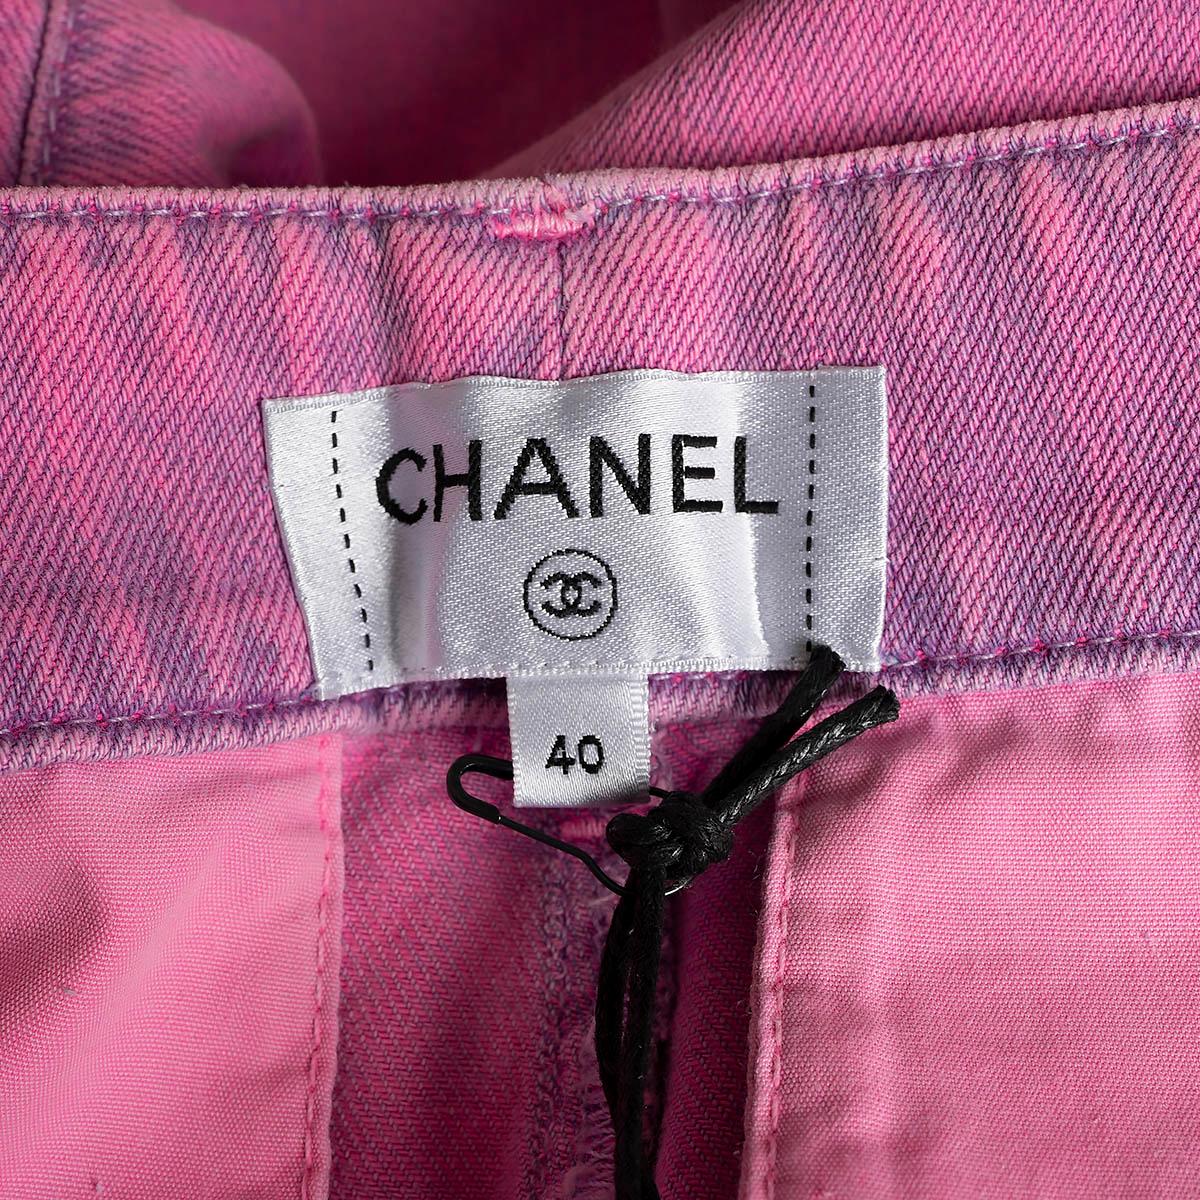 CHANEL neon pink cotton 2021 21S HIGH RISE WIDE LEG Jeans Pants 40 M For Sale 2